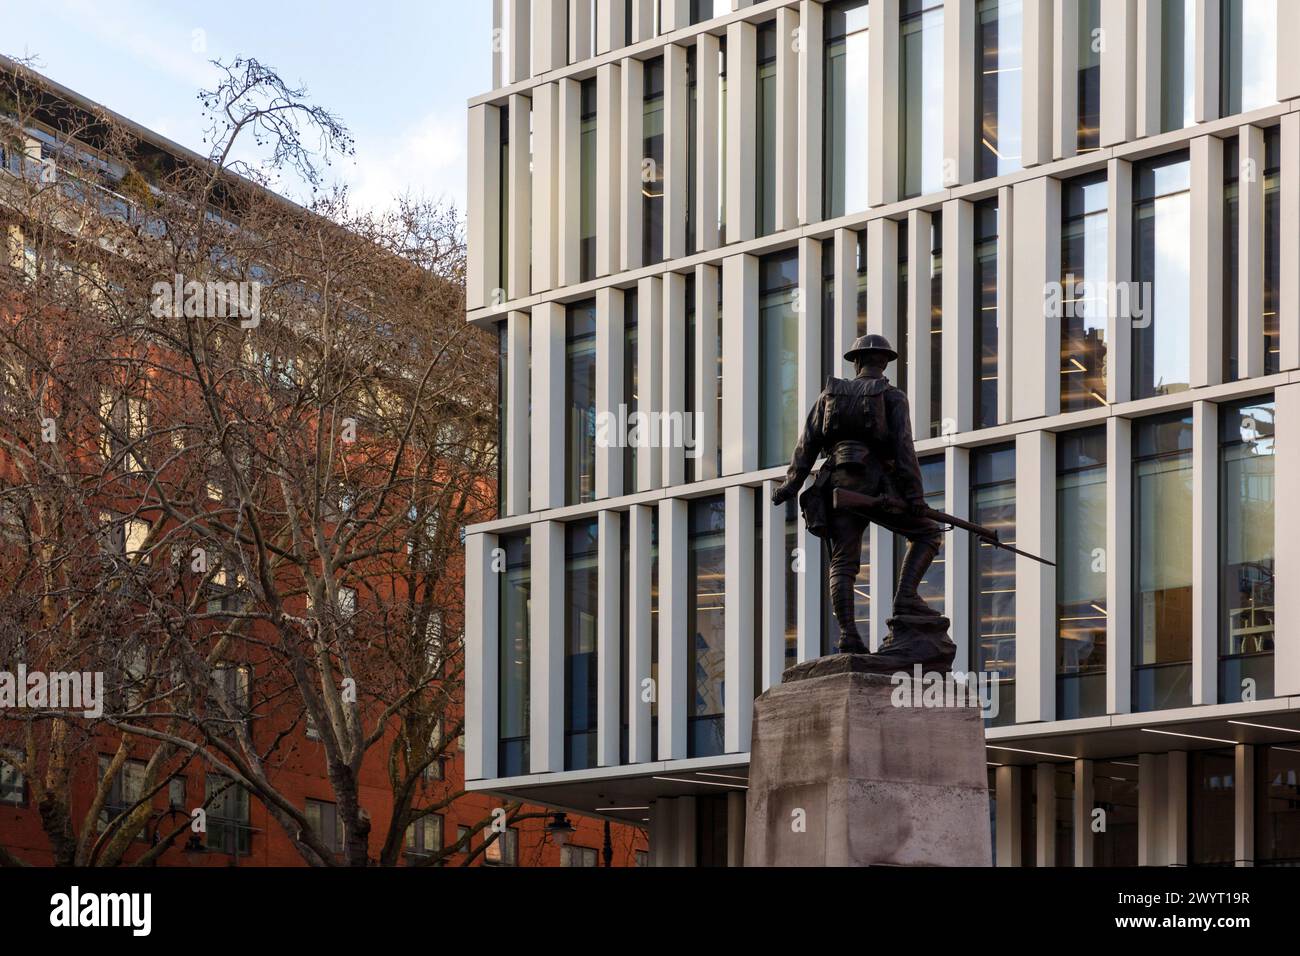 Exterior detail showing the WW1 Royal Fusiliers memorial. 150 Holborn, Holborn, United Kingdom. Architect: Perkins & Will , 2023. Stock Photo